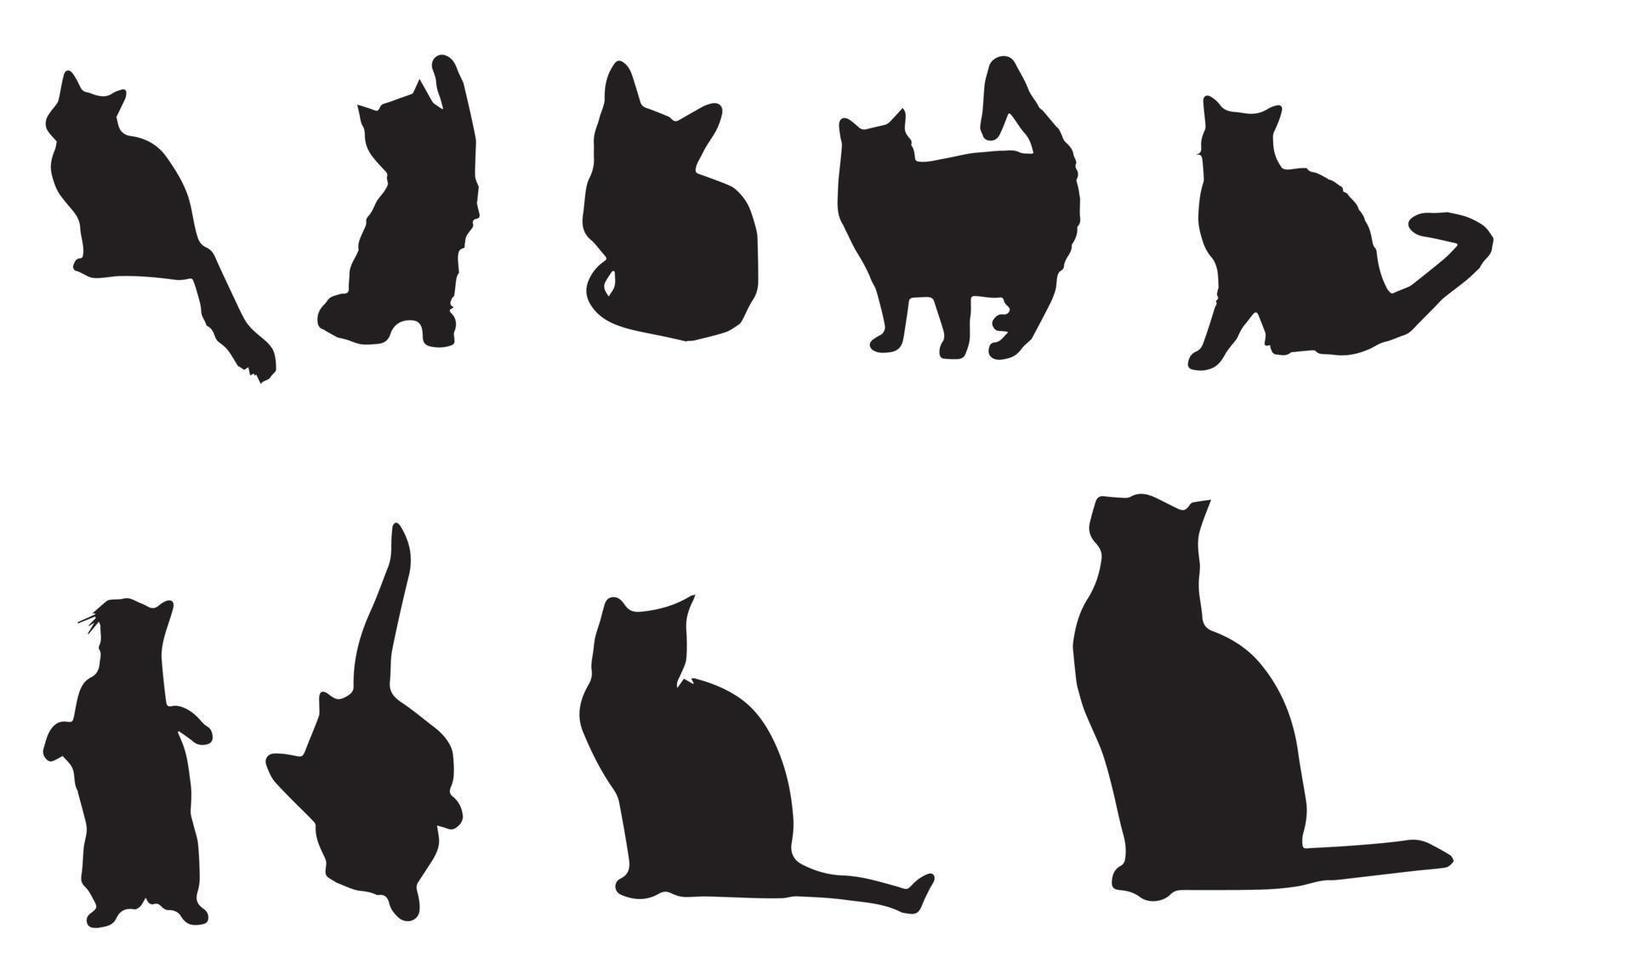 cats collection vector illustration design black and white